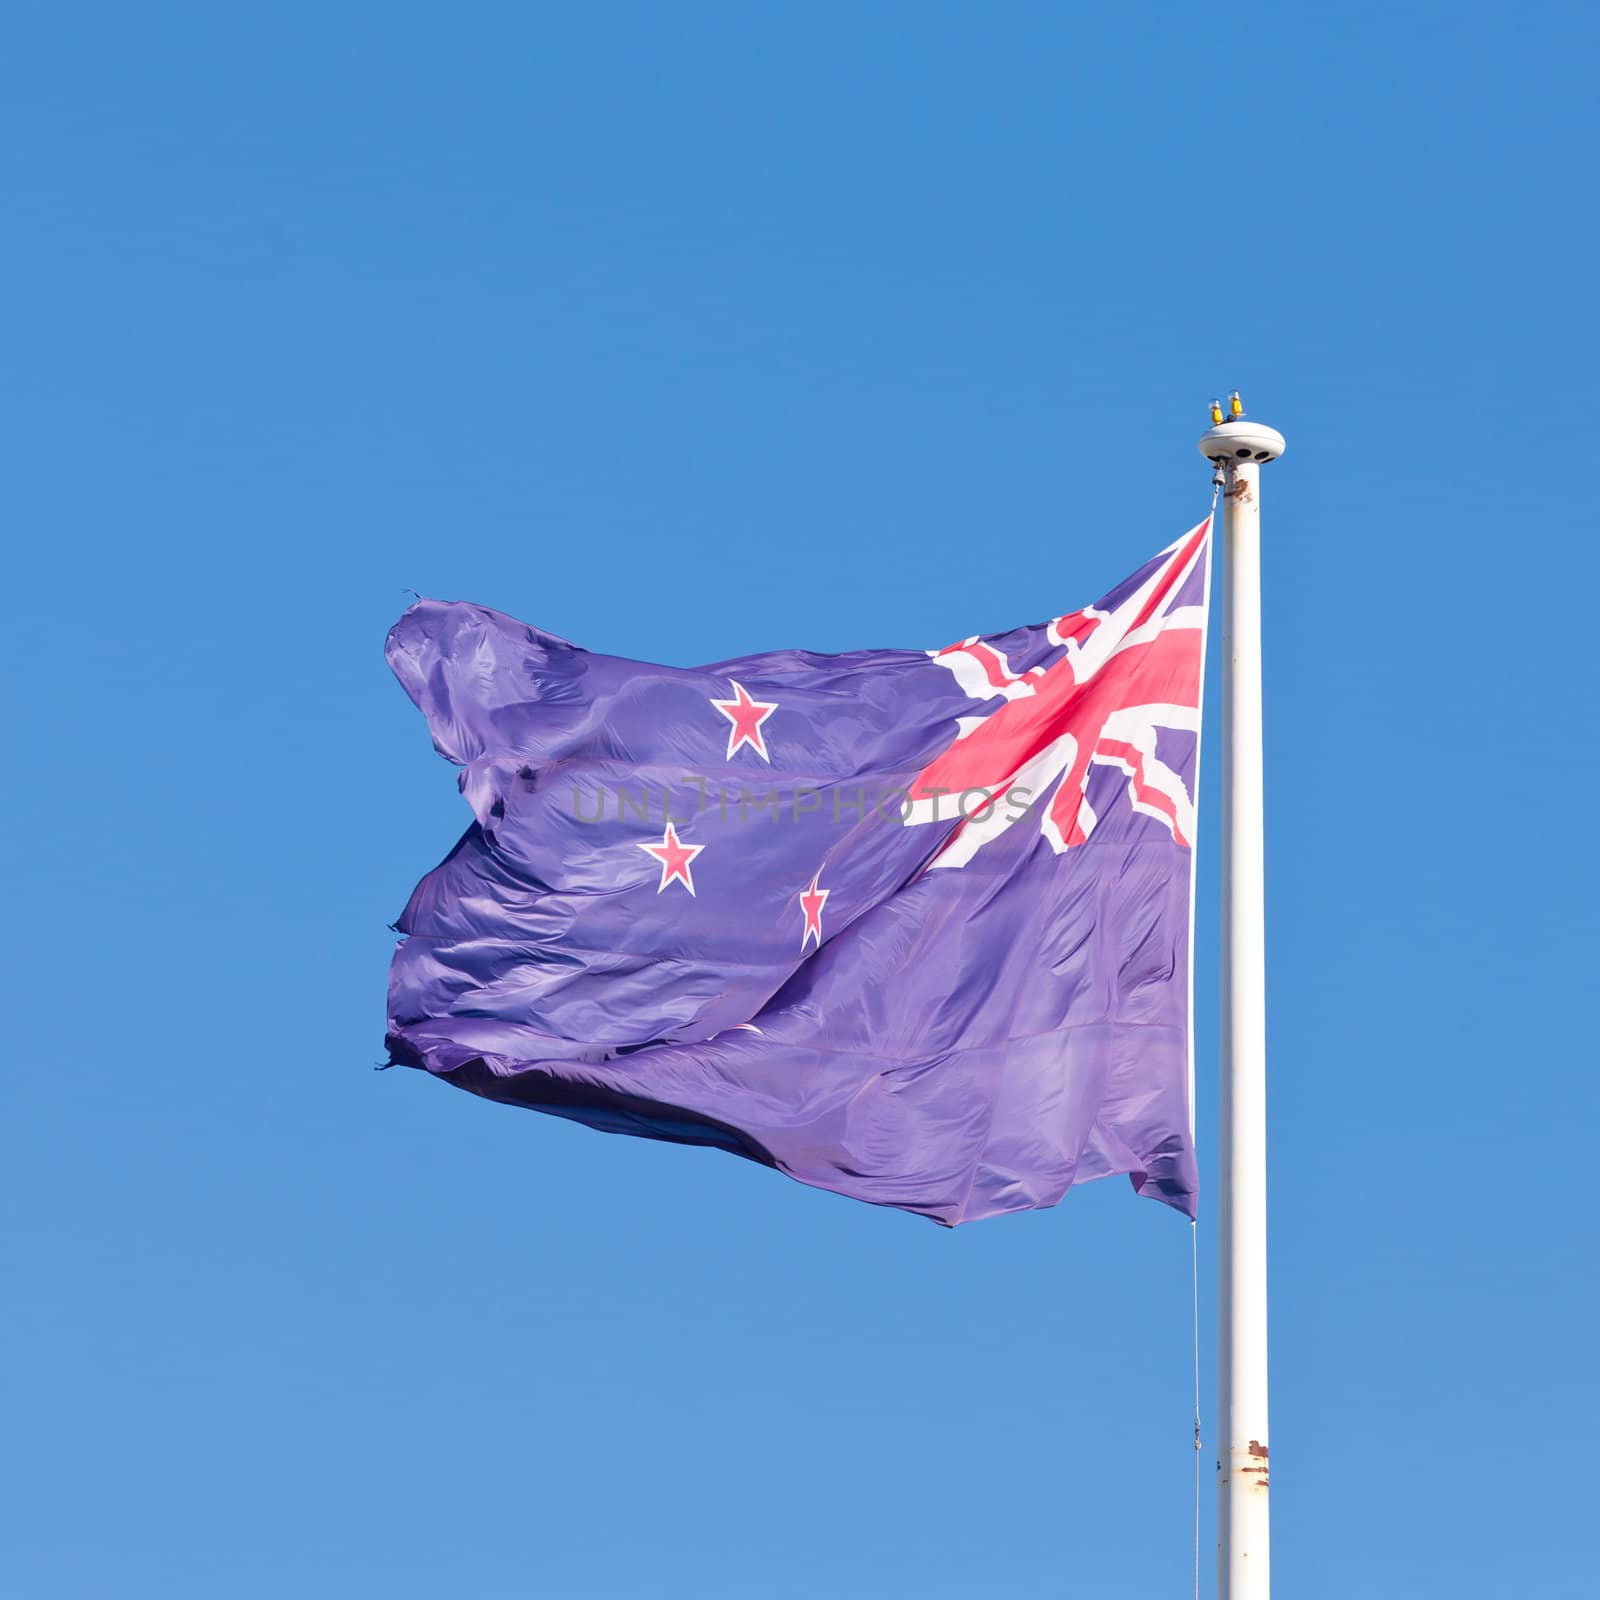 New Zealand national flag banner flying on pole in wind with blue sky background